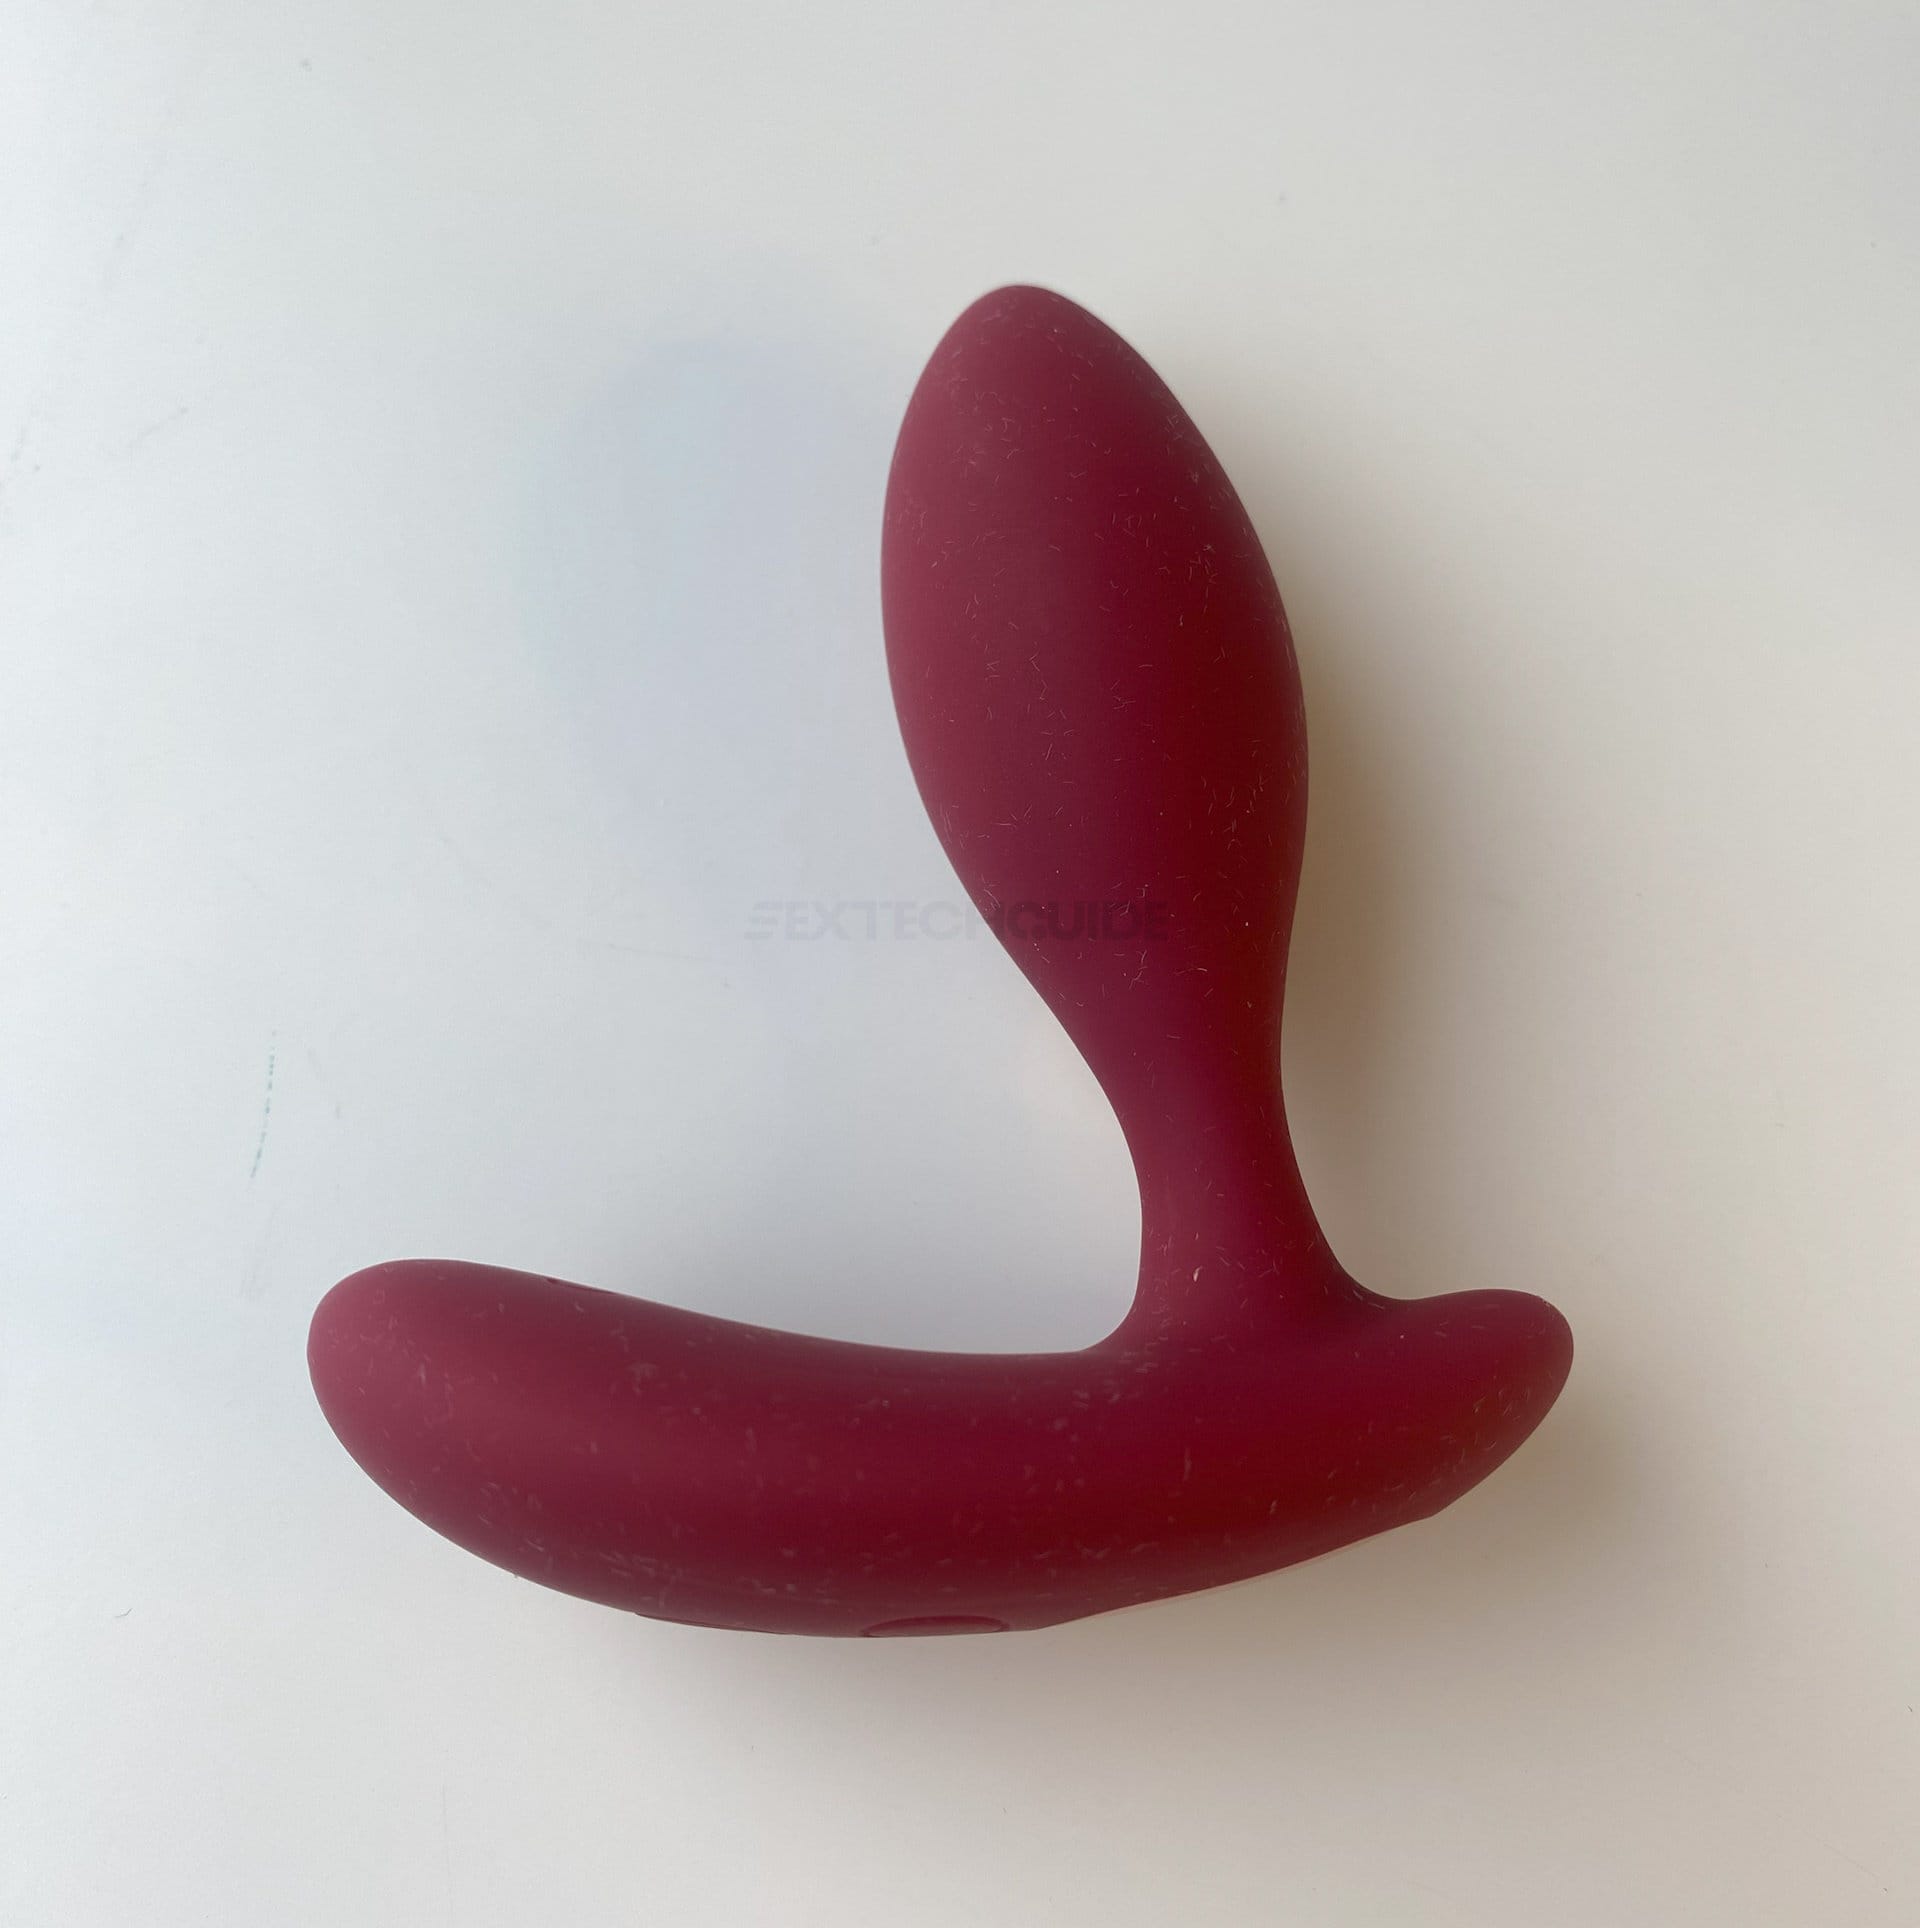 A red sex toy on a white surface, designed for enhancing pleasure.